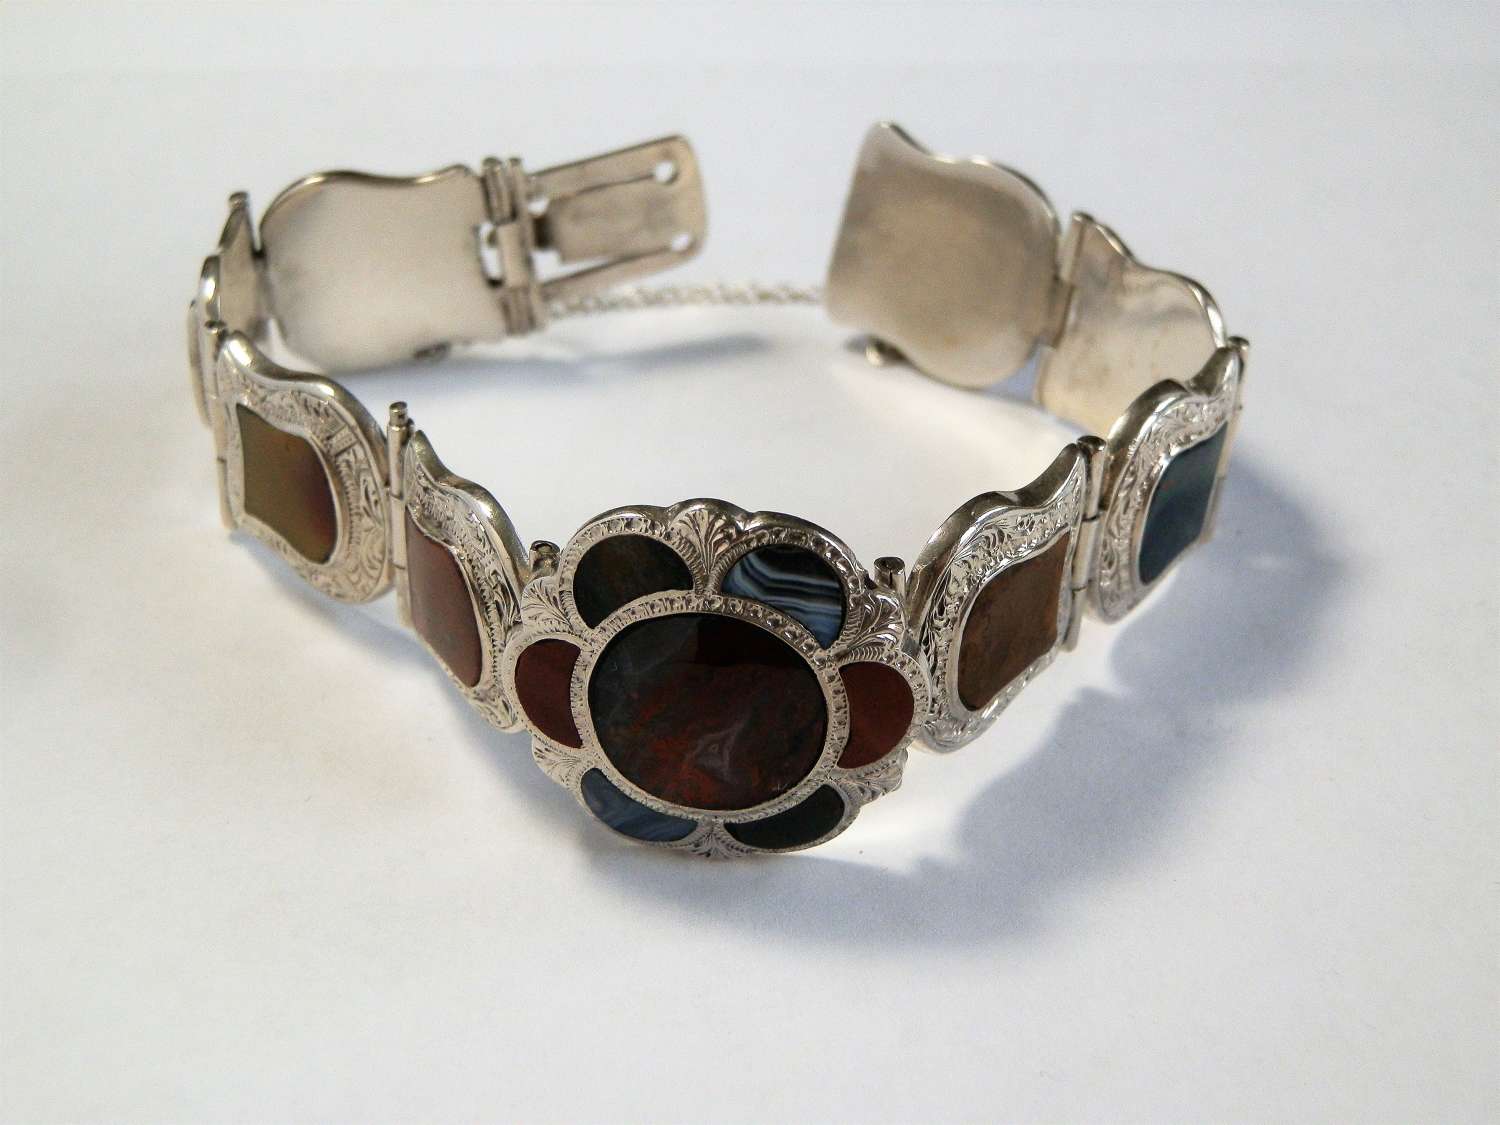 Scottish Victorian silver and agate bracelet, c. 1880